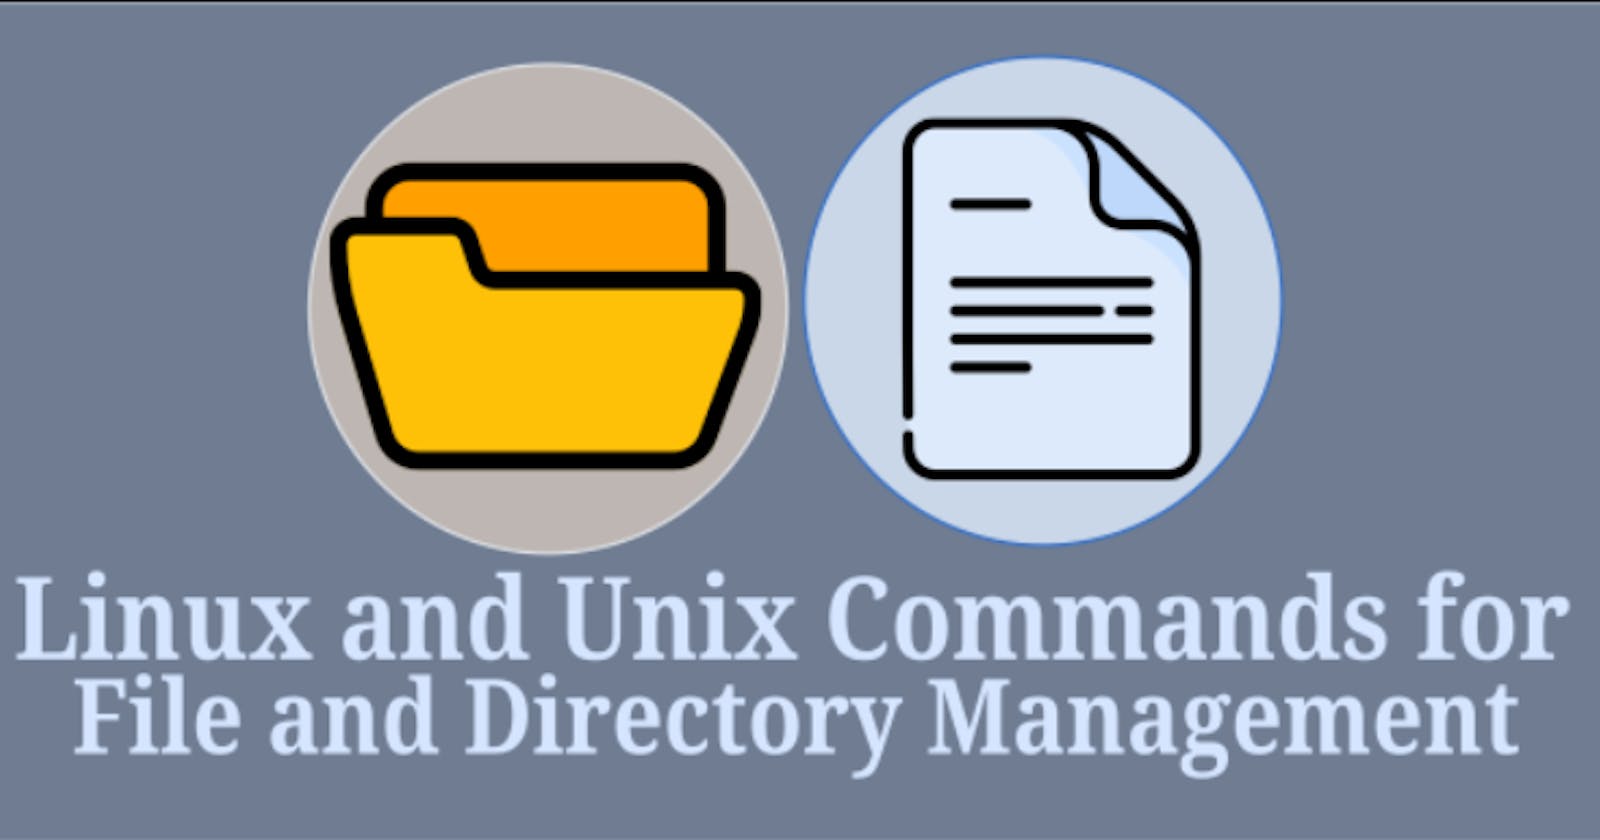 Day 3 : Mastering Basic Unix Commands for File Management: A Step-by-Step Guide 📁🔒🔍